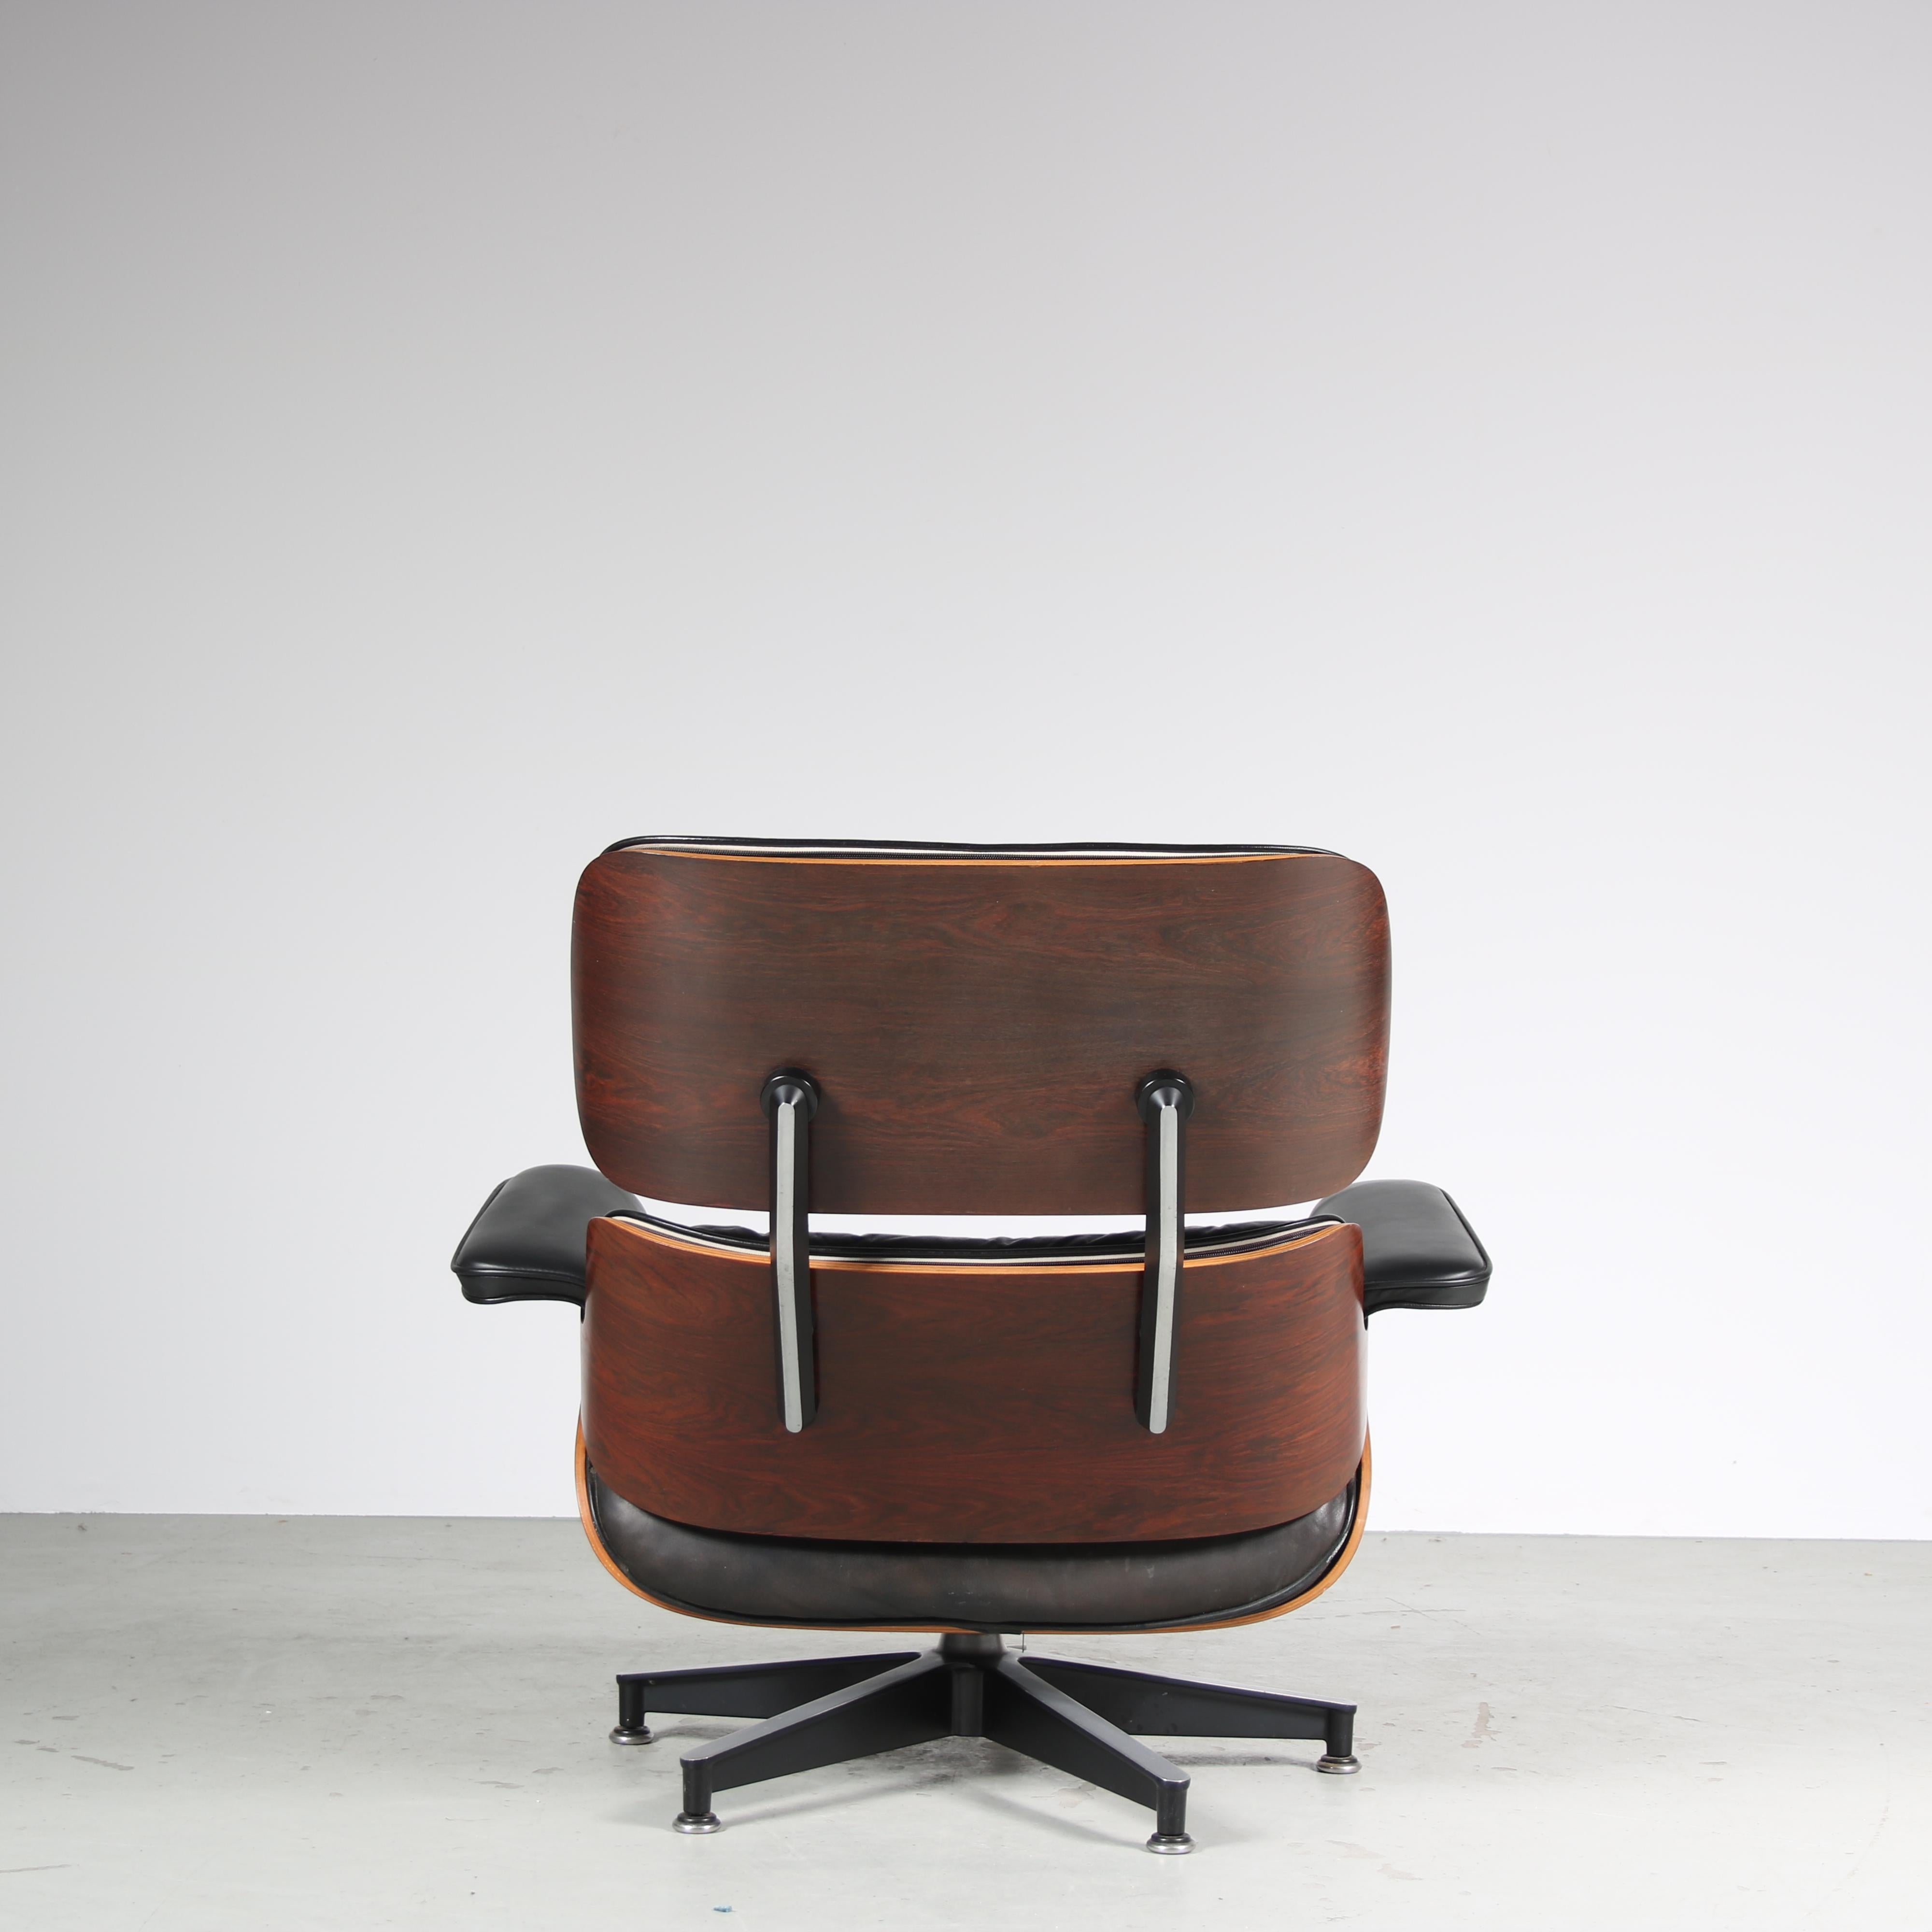 20th Century Lounge Chair by Charles & Ray Eames for Herman Miller, USA 1